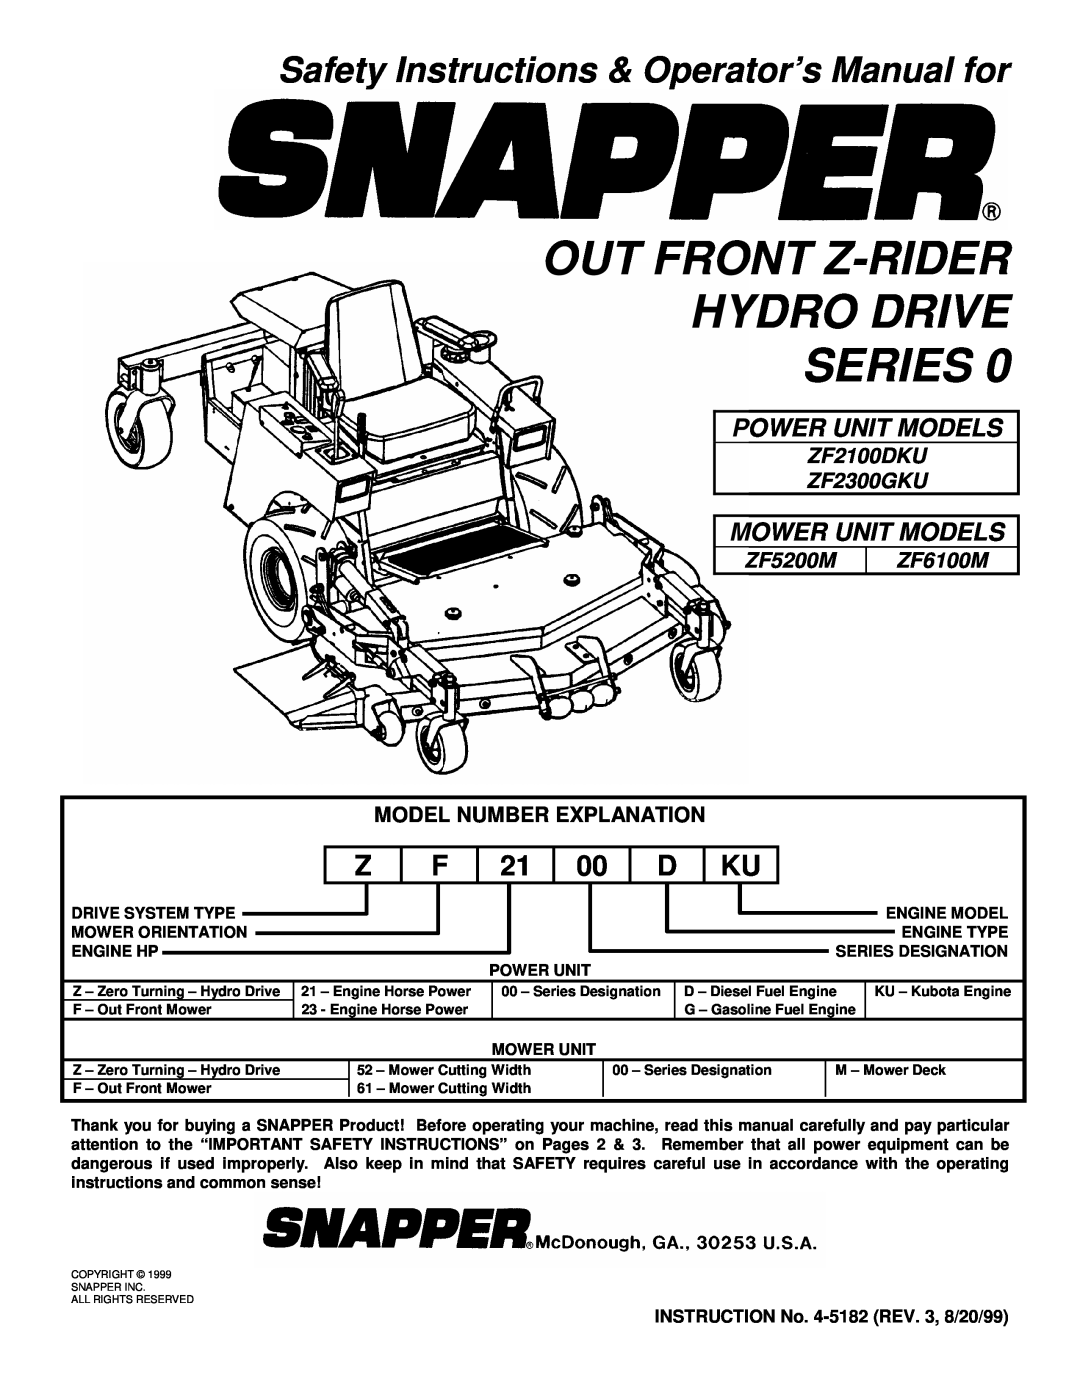 Snapper ZF2300GKU, ZF2100DKU, ZF5200M, ZF6100M important safety instructions Safety Instructions & Operator’s Manual for 